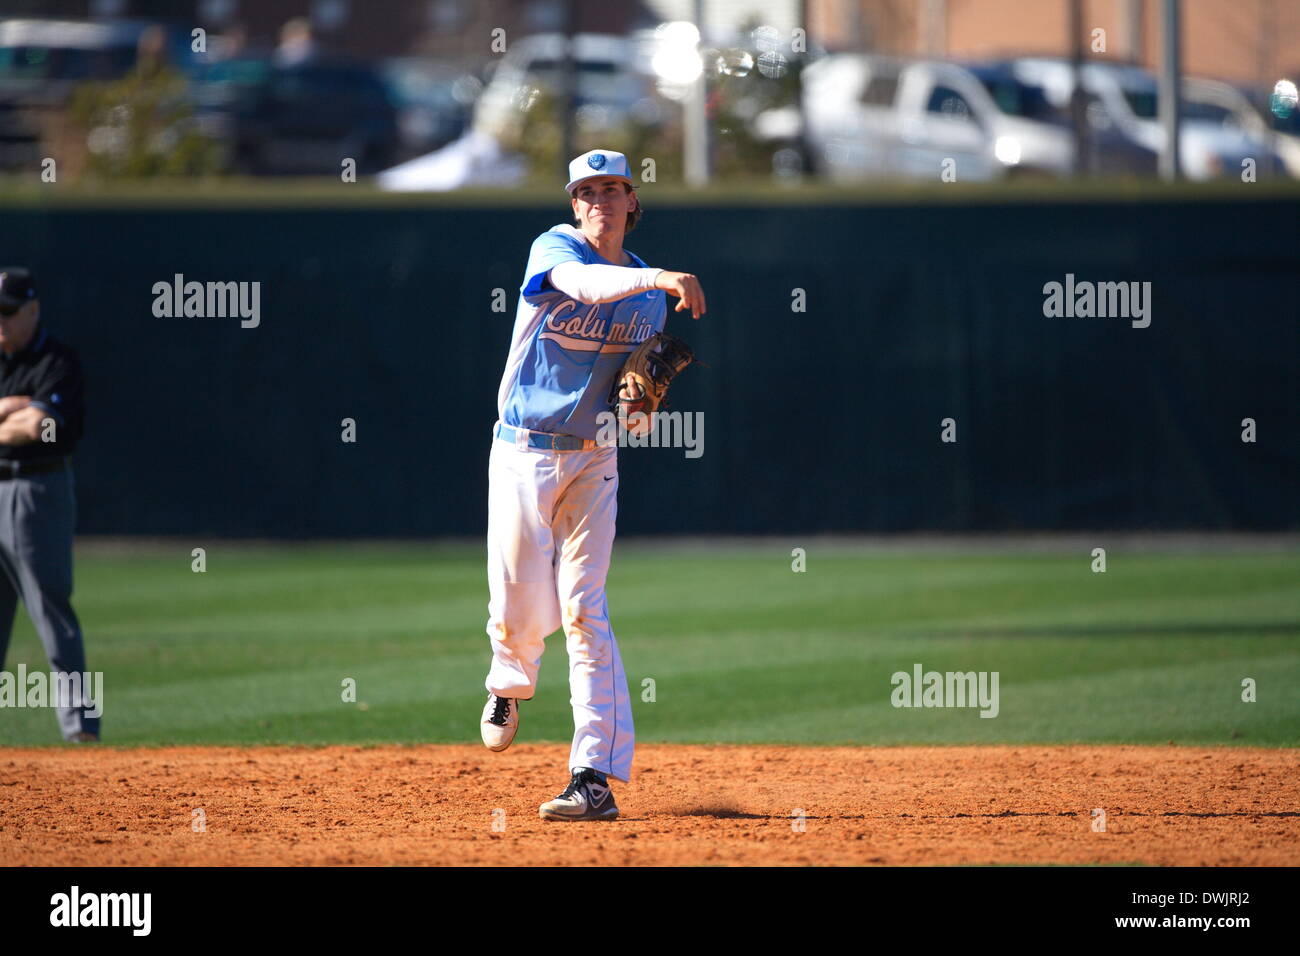 Kennesaw, Georgia, USA.  March 8, 2014 -- Columbia shortstop Aaron Silbar (10) during the first game of Saturday's doubleheader between Columbia University and Kennesaw State University. The teams split the doubleheader. Credit:  Wayne Hughes | Alamy Live News Stock Photo